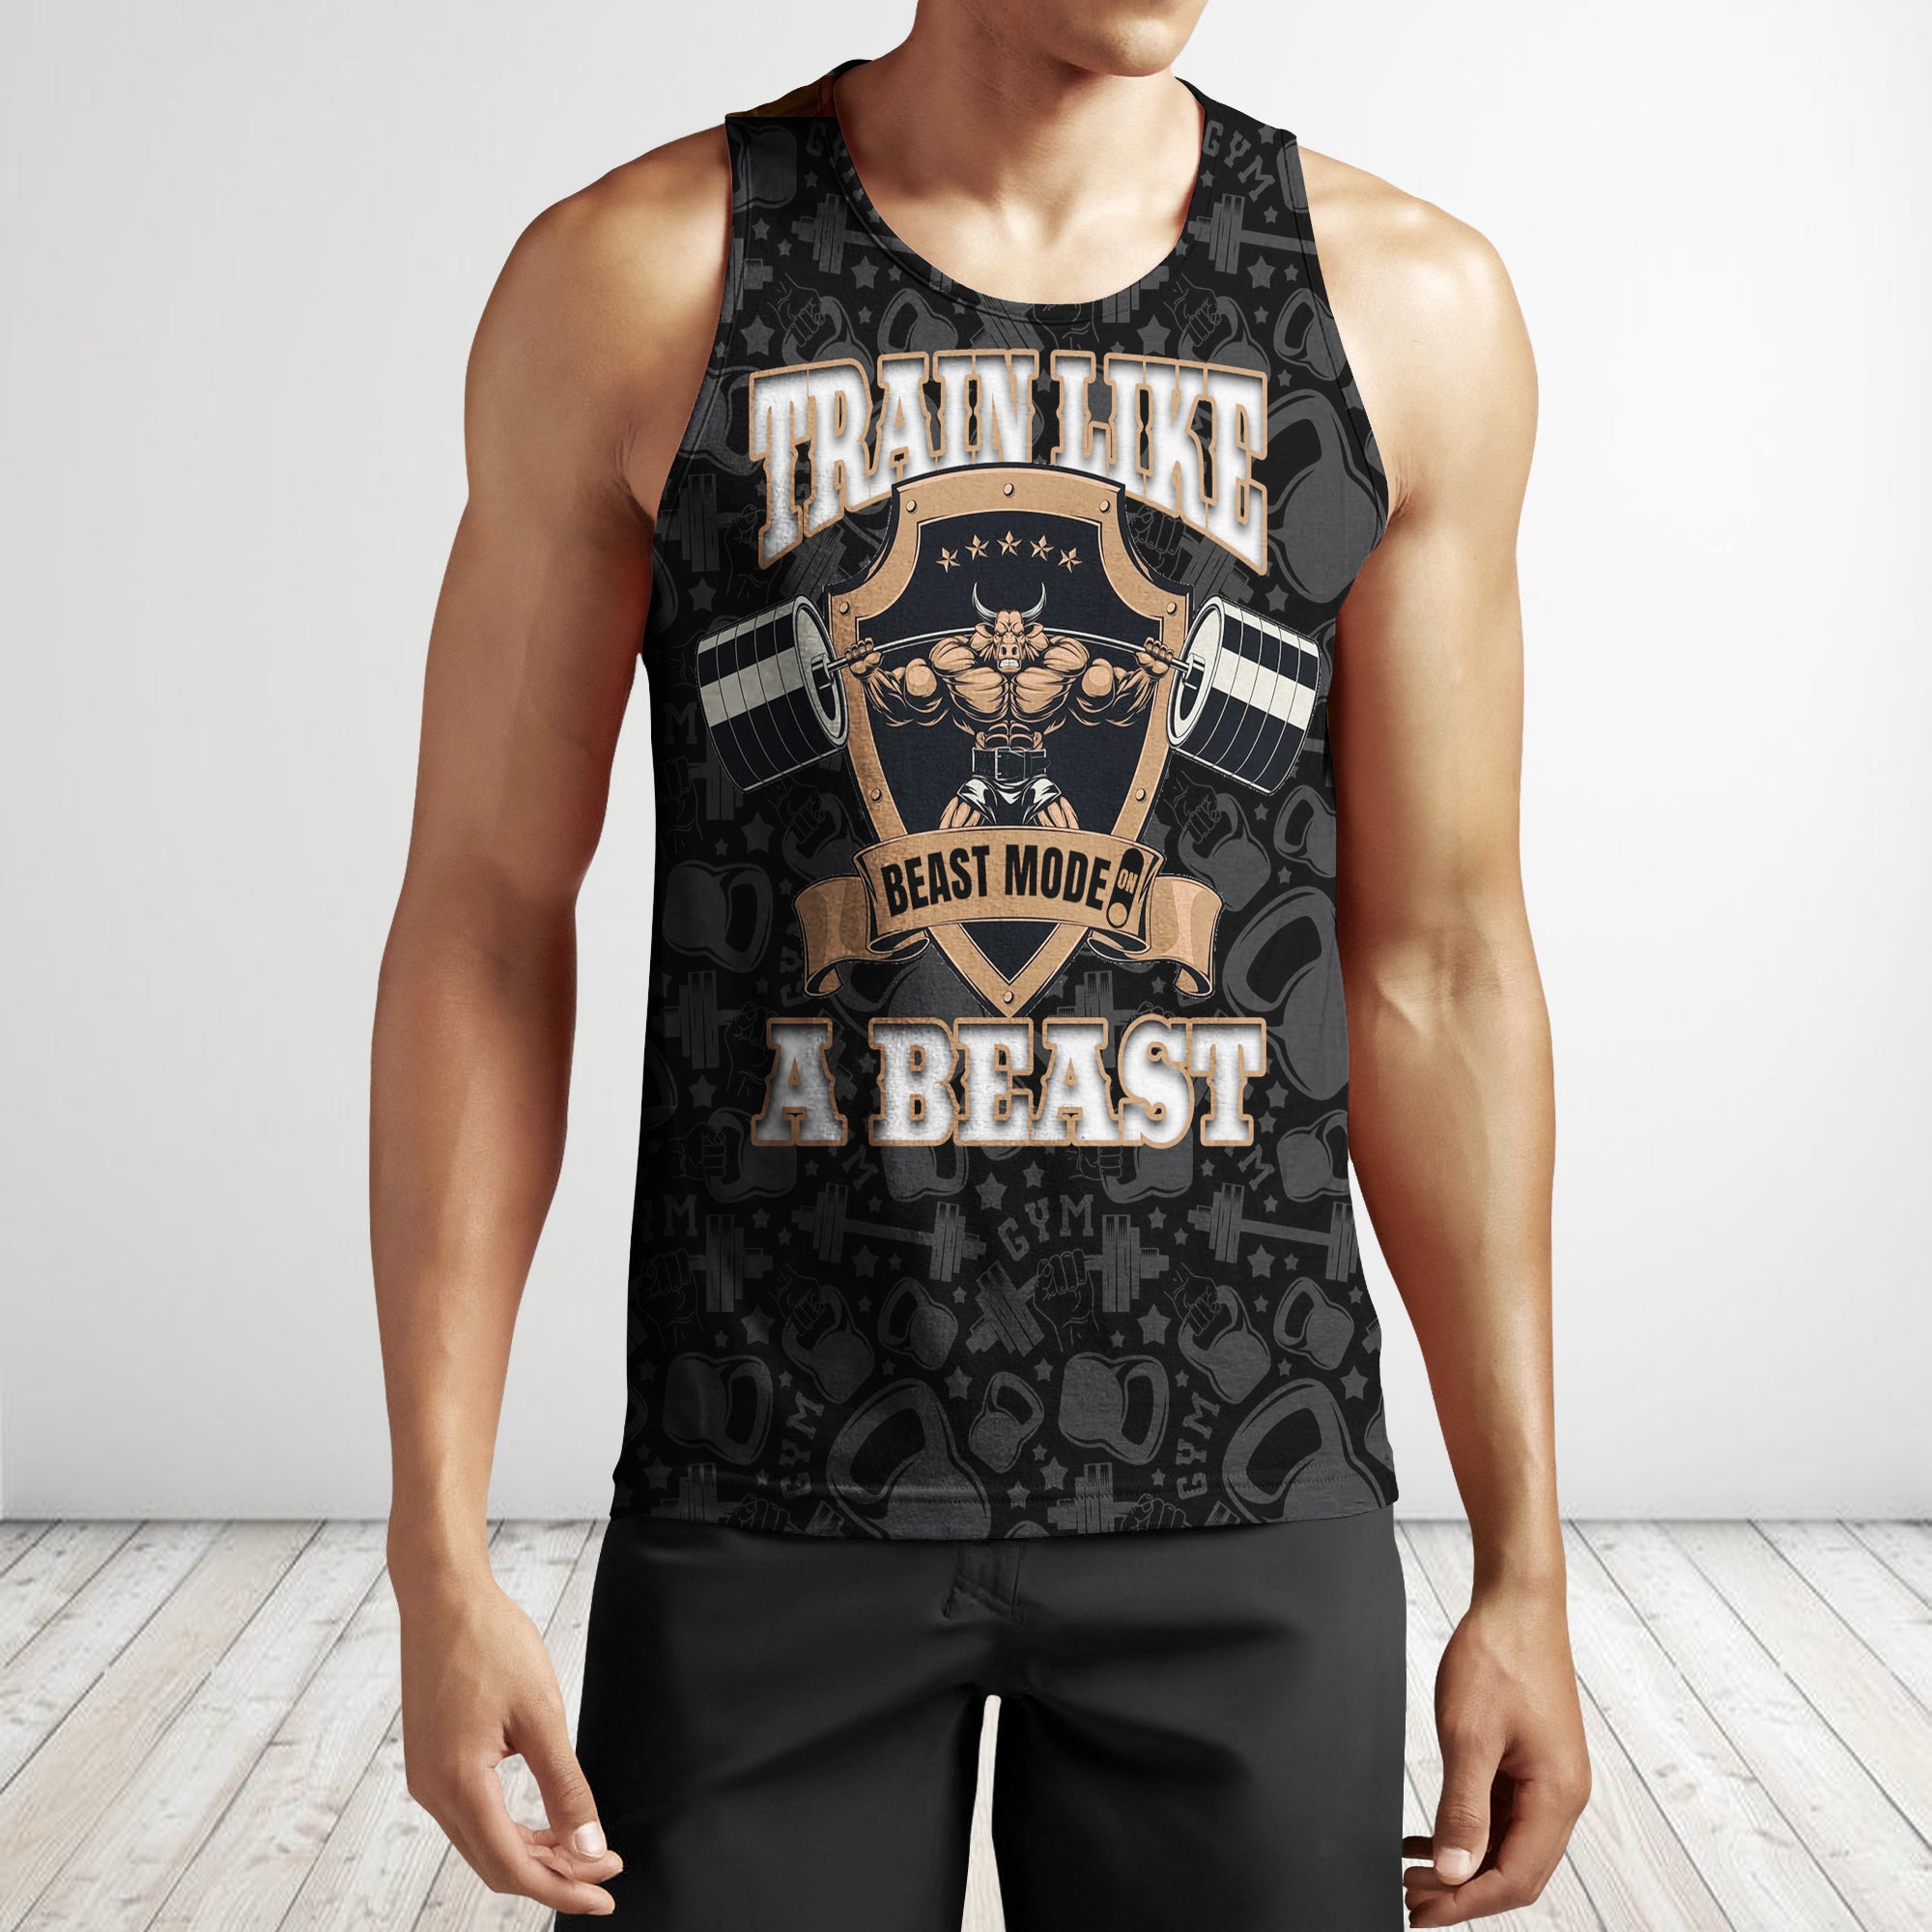 Beauty and Beast Shirt Set. Couples Workout Shirts. Mens Gym Shirt. Womens  Gym Tank. Fitness Tank Tops. His and Hers Workout Shirts Tanks. -   Canada